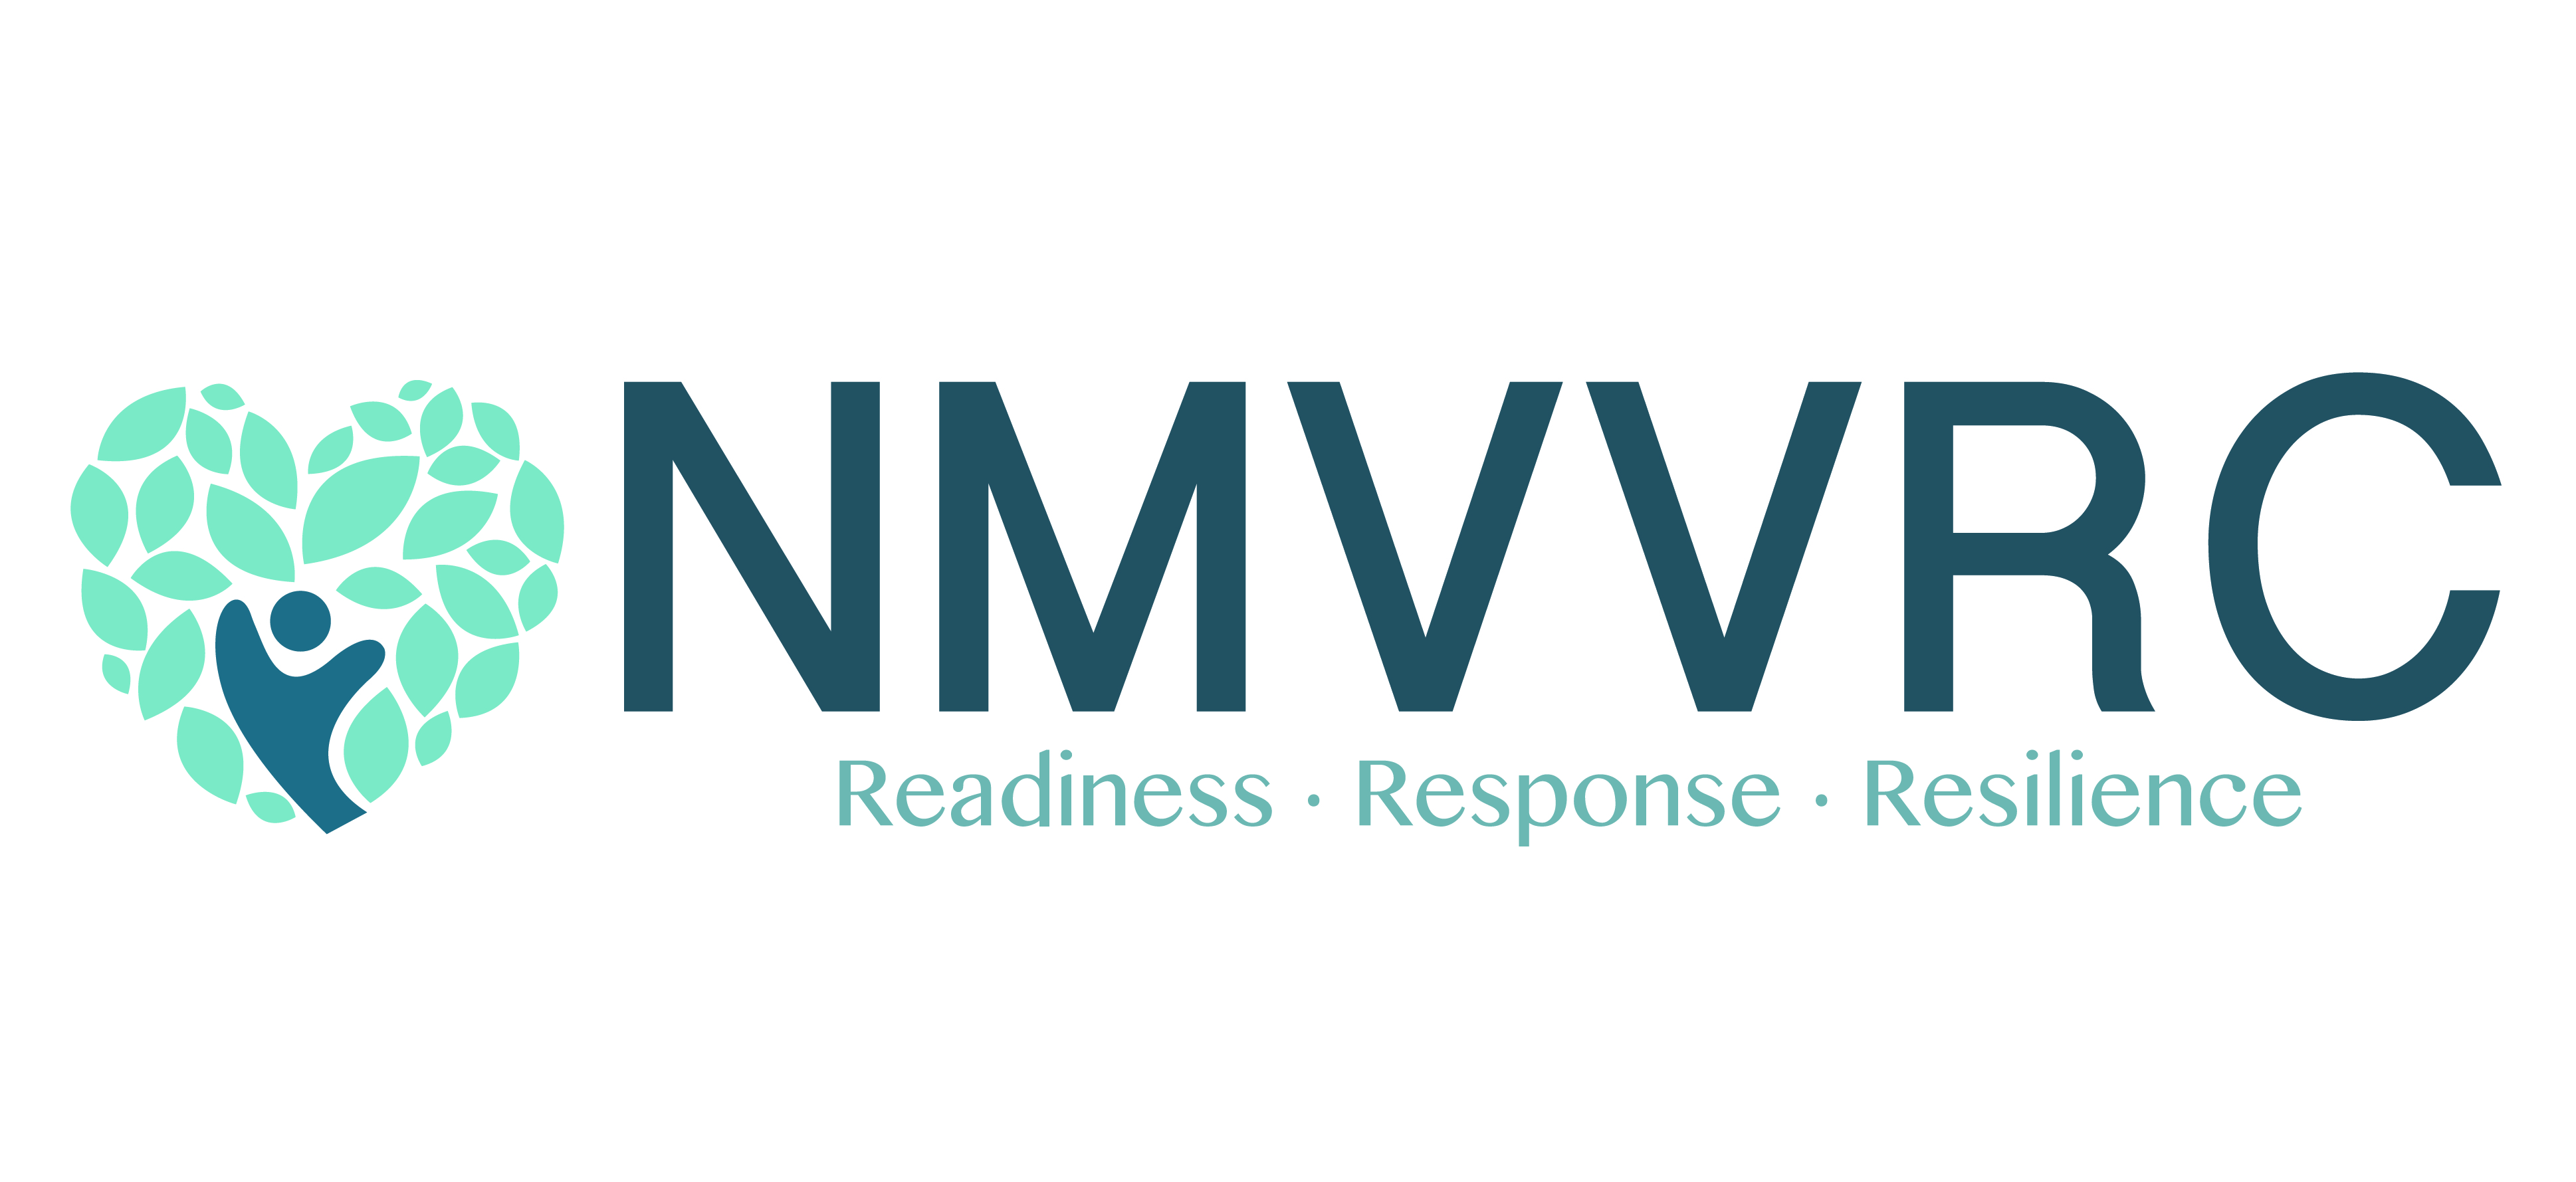 Heart with letters NMVVRC. Readiness, Response, and Resilience spelled underneath NMVVRC